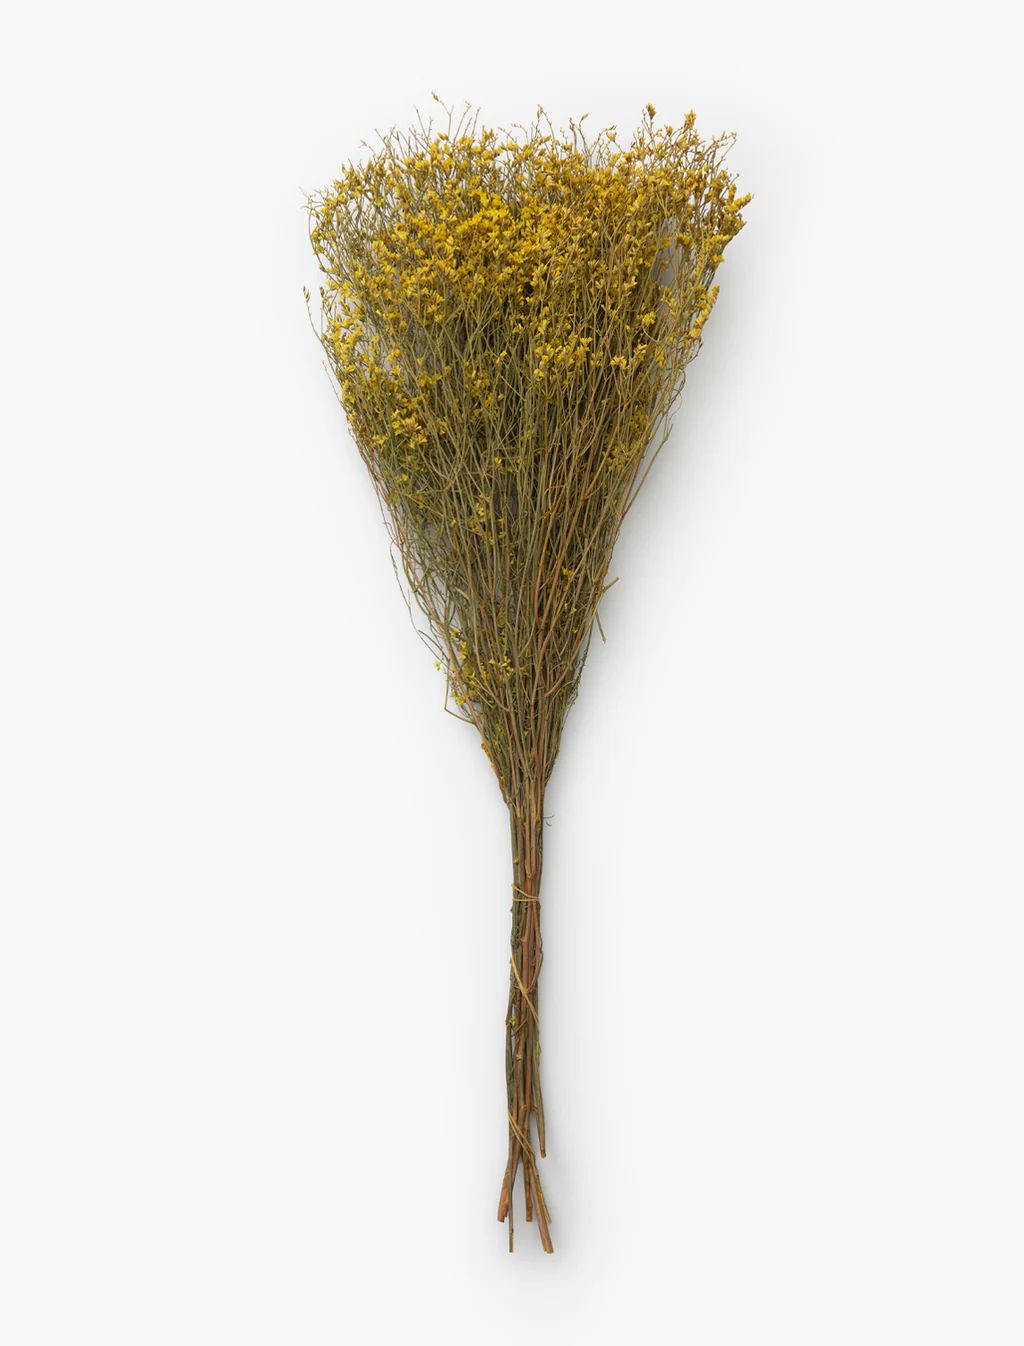 Dried Natural Pearl Grass Bunch | McGee & Co.